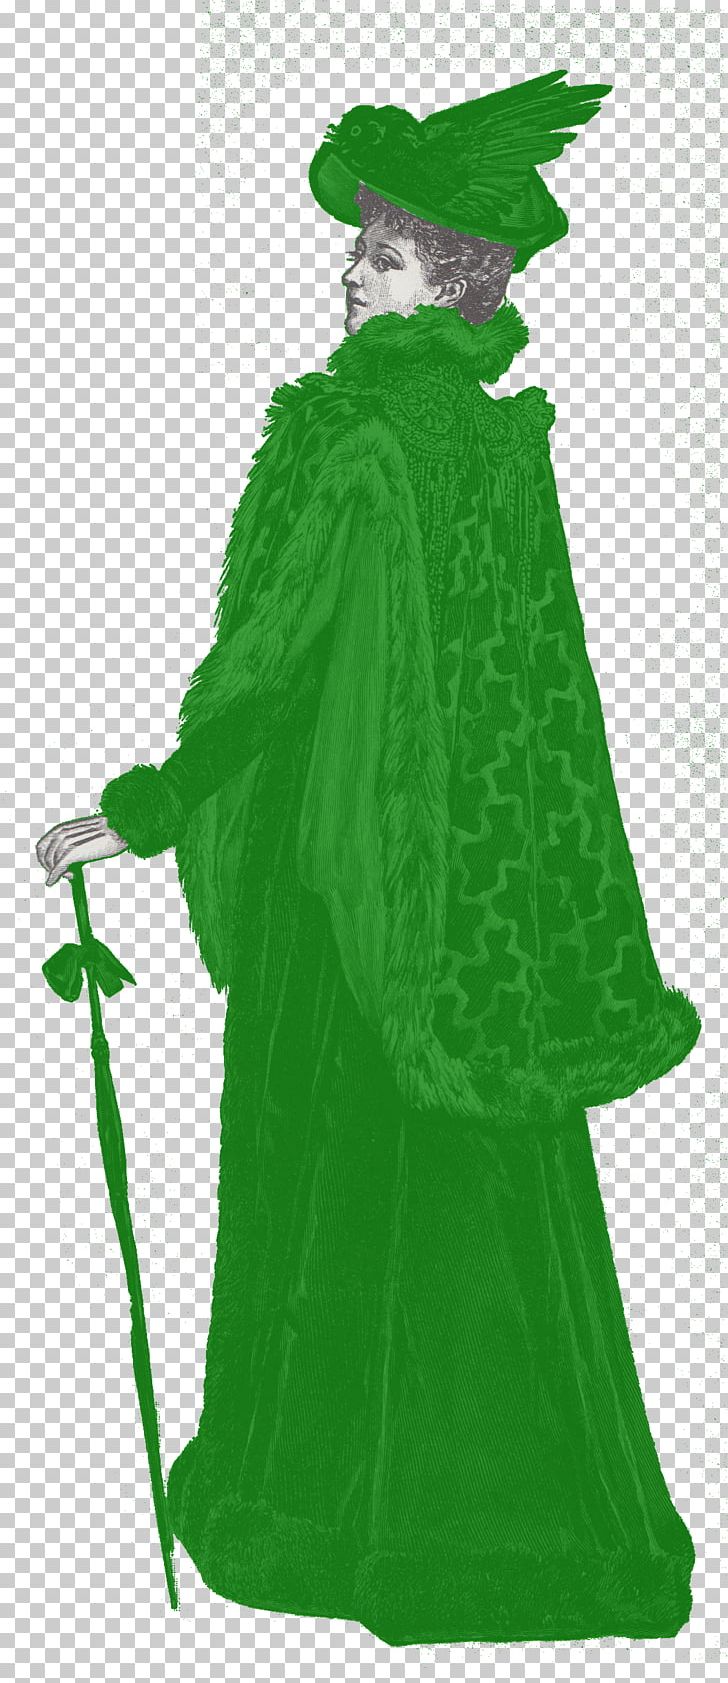 Robe Costume Design Green Dress PNG, Clipart, Character, Clothing, Costume, Costume Design, Dress Free PNG Download